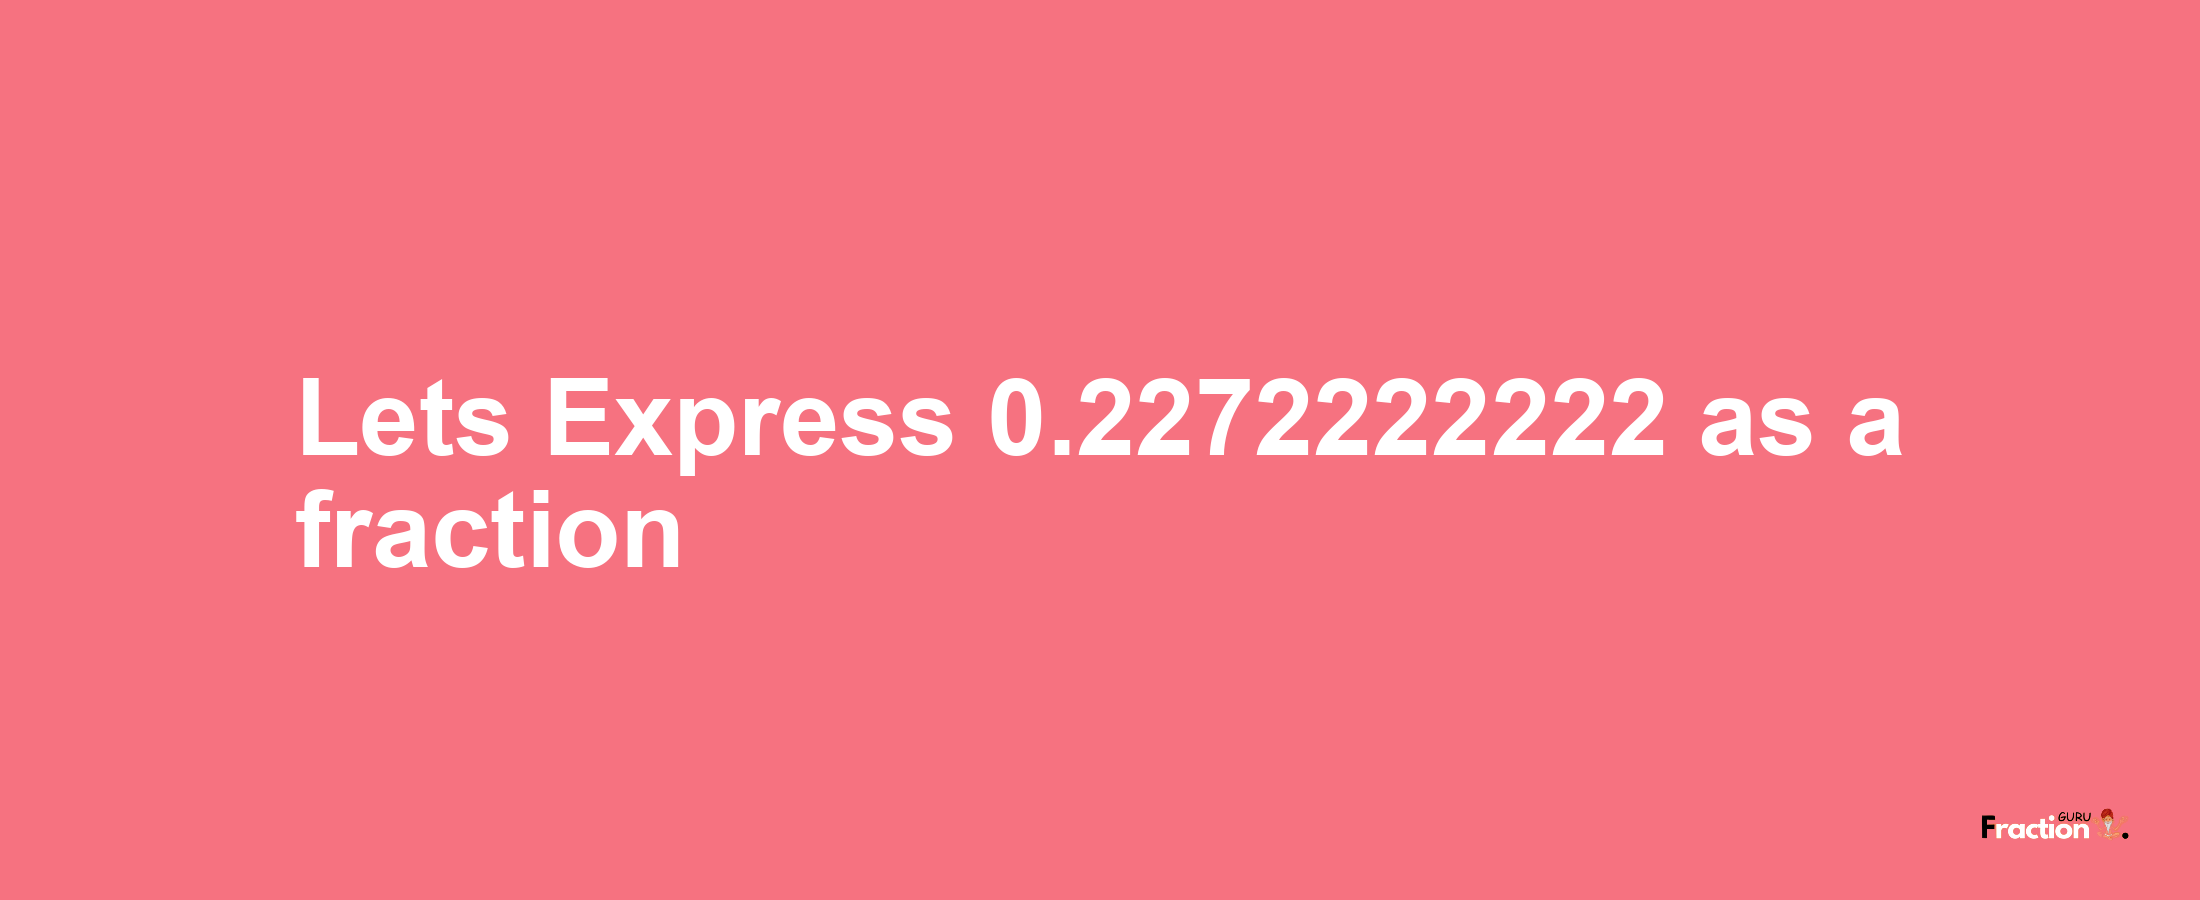 Lets Express 0.2272222222 as afraction